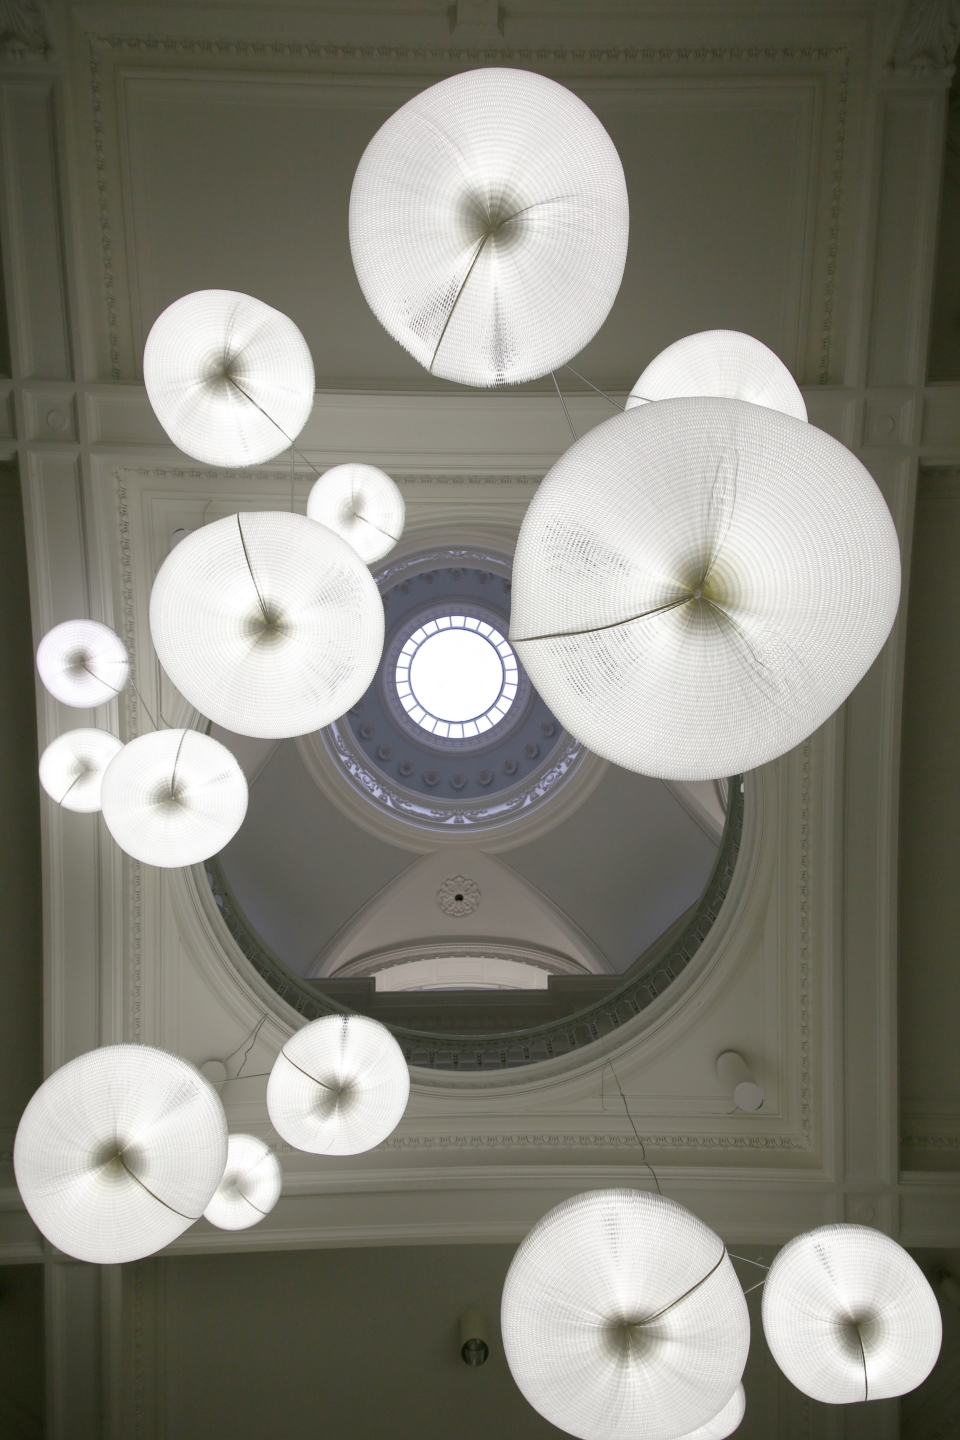 cloud mobiles installed in the Vancouver Art Gallery's 